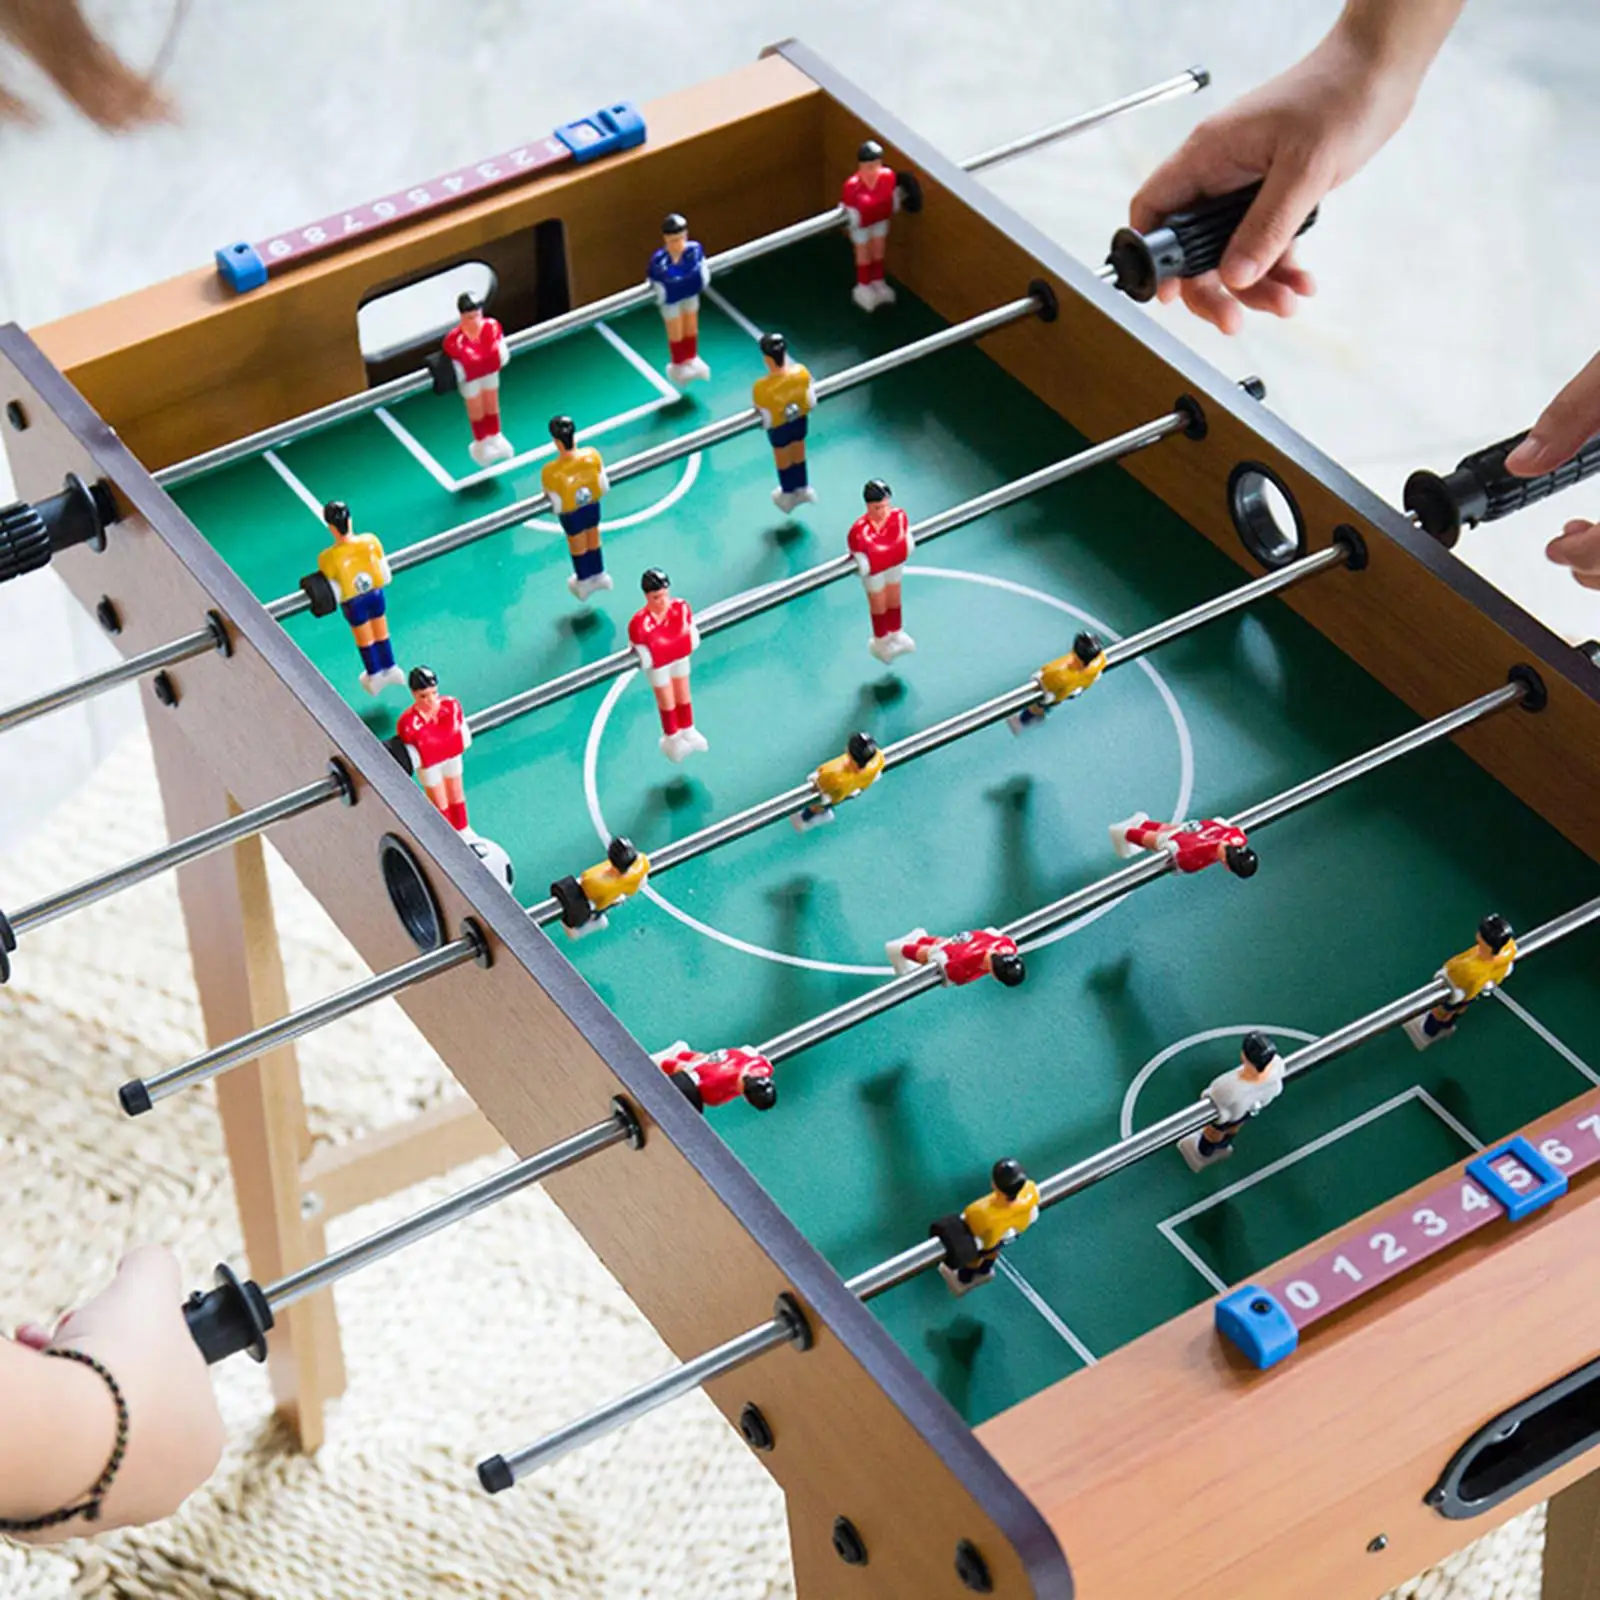 Portable Foosball Table Sports with Ball Toy Tabletop Football Game for Kids